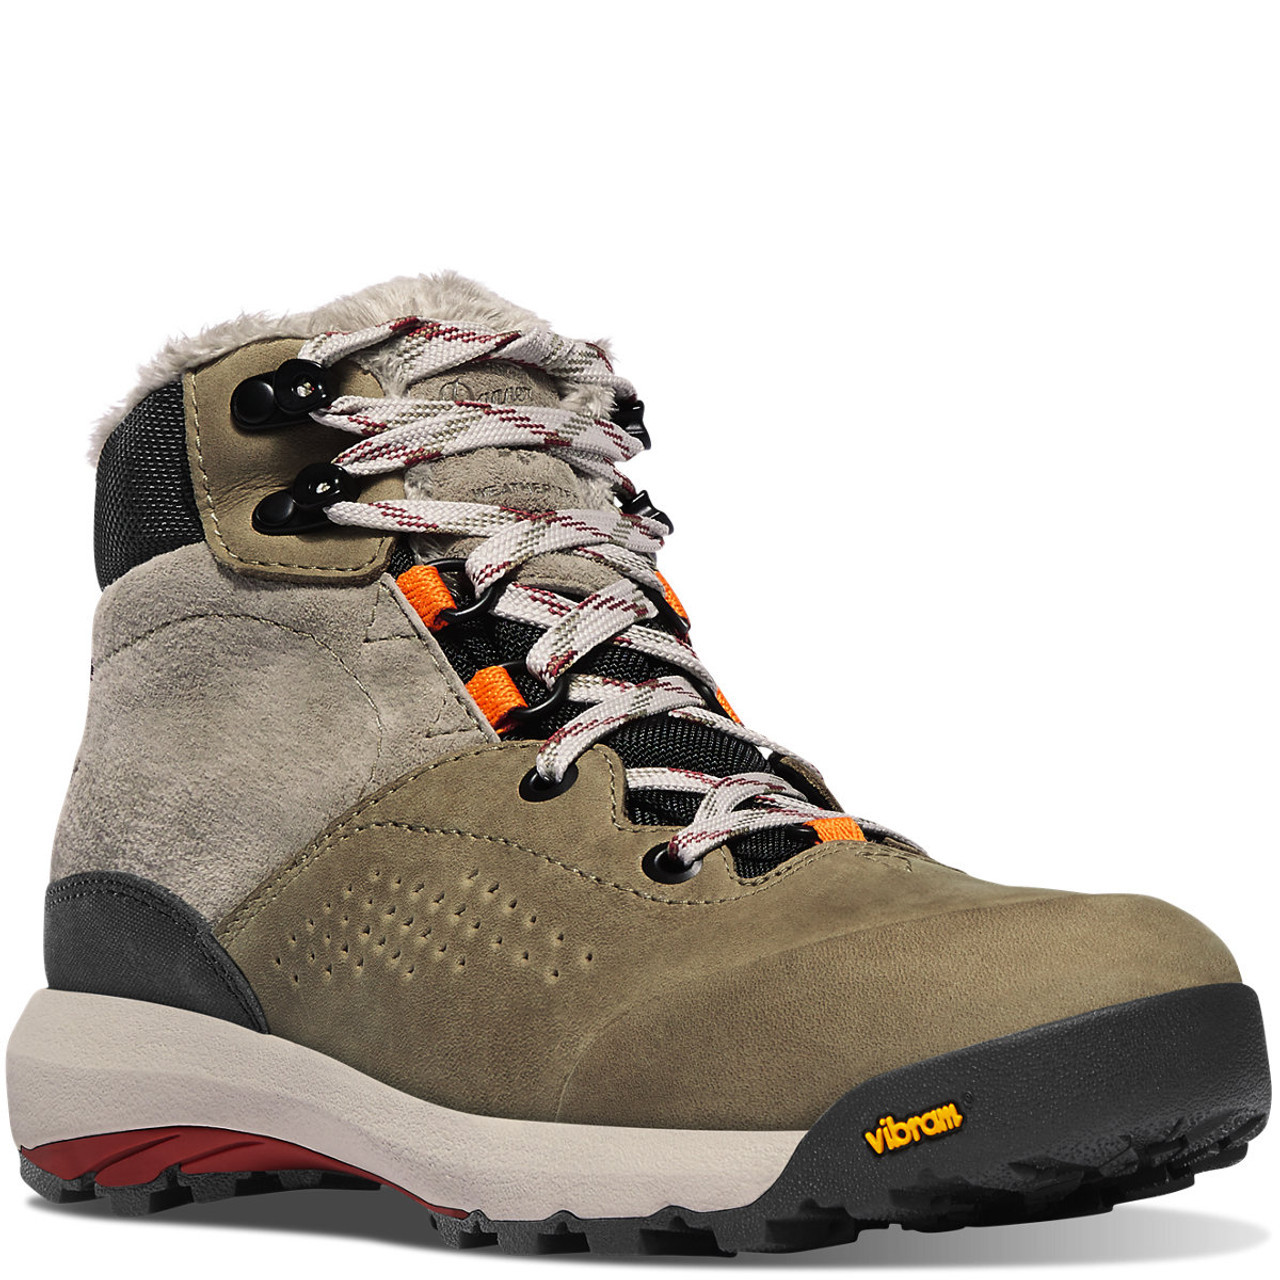 DANNER® INQUIRE MID INSULATED WOMEN'S SIZING HAZELWOOD/TANGERINE/RED LIFESTYLE BOOTS 64571